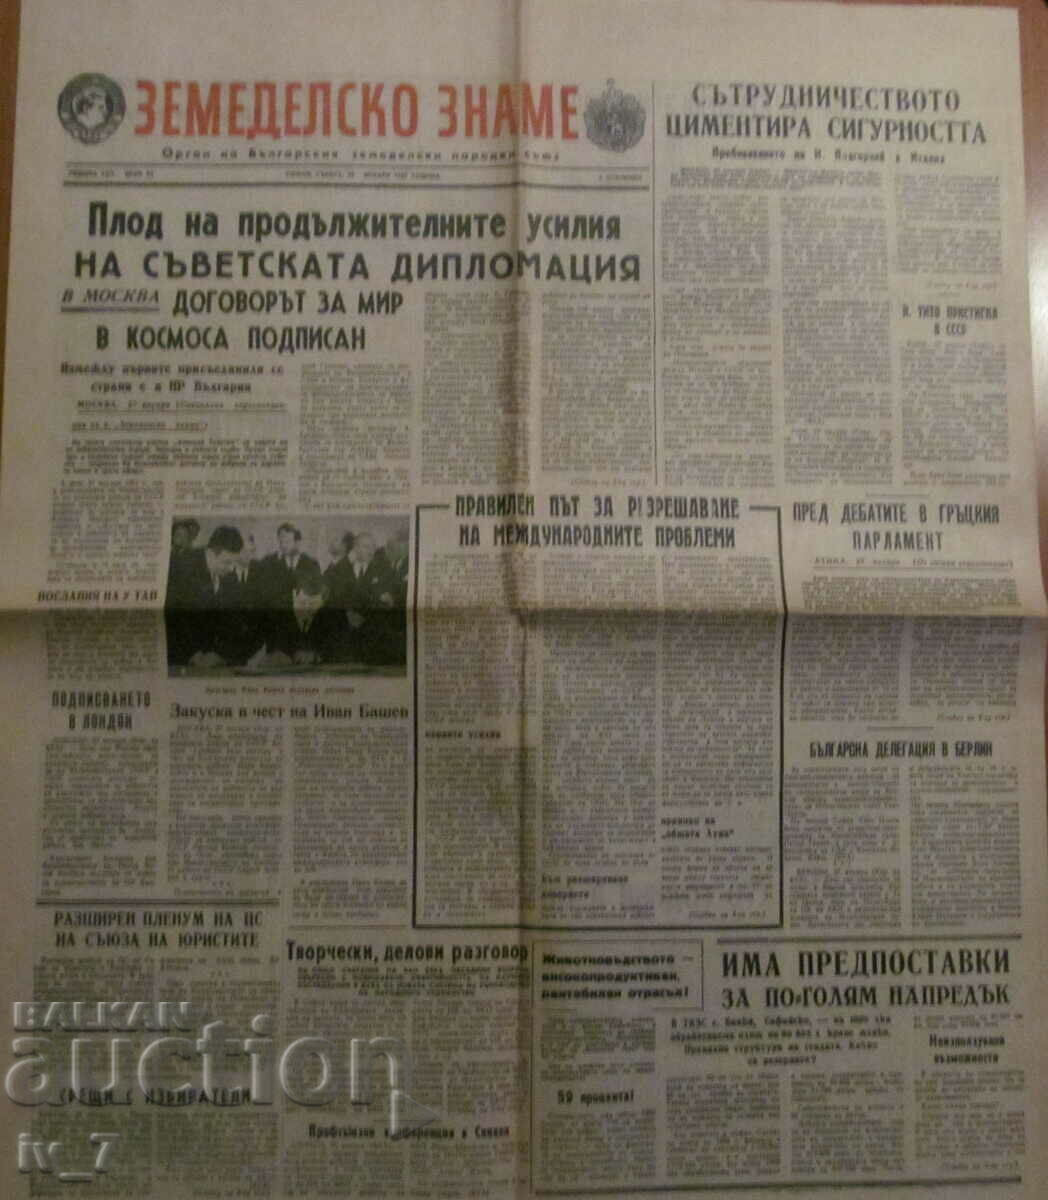 Newspaper "AGRICULTURAL FLAG" - January 28, 1967